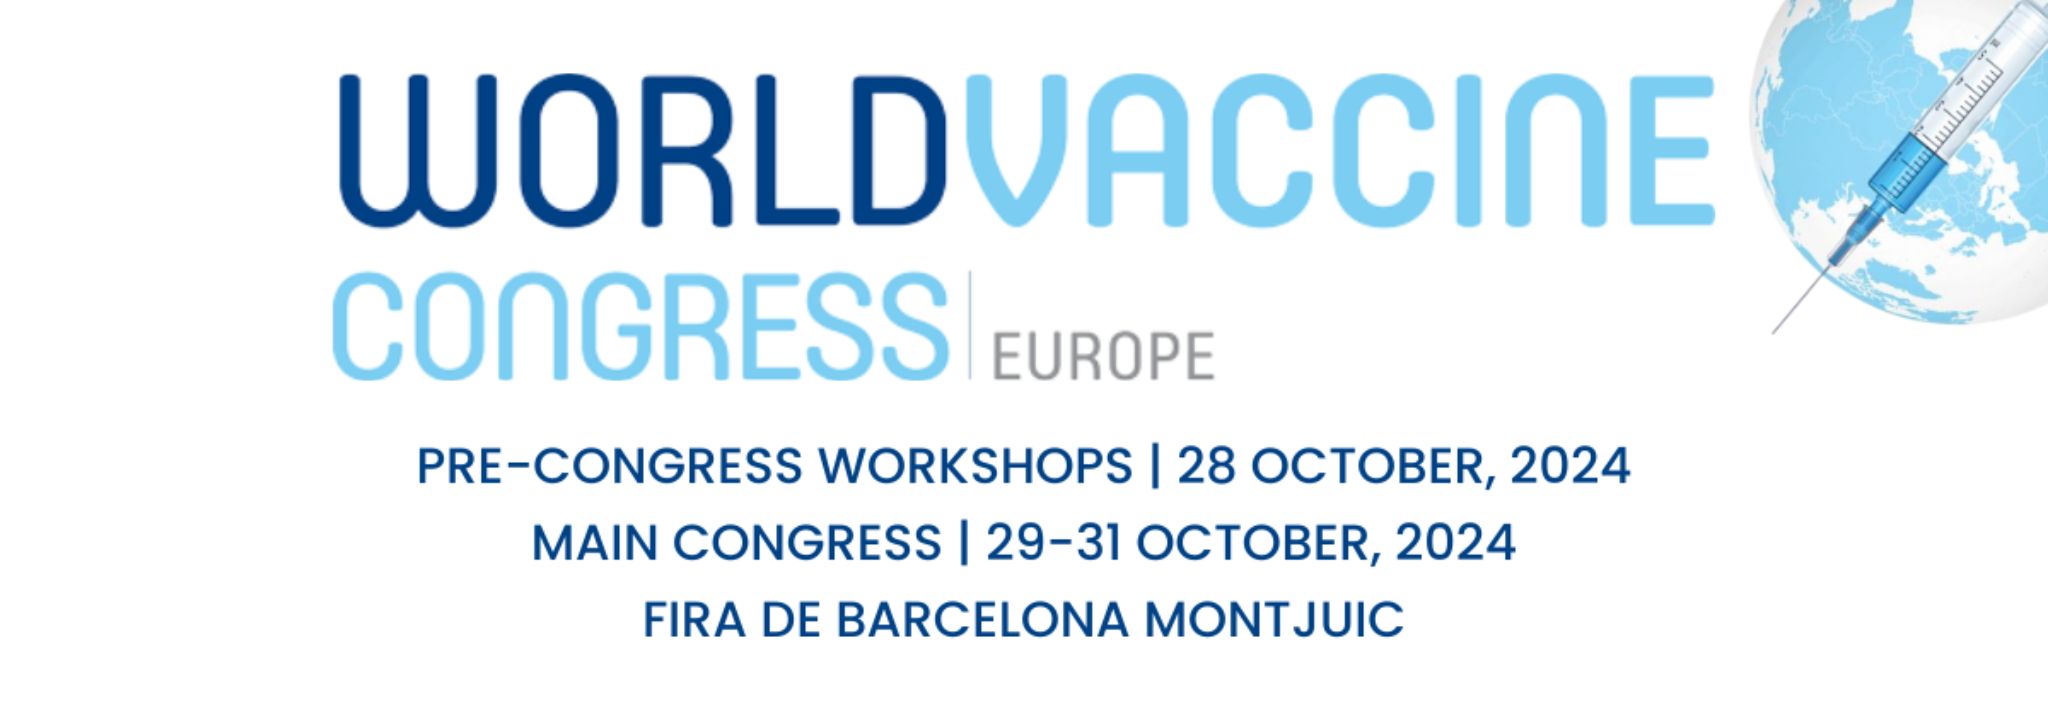 Attend the world’s leading vaccine event